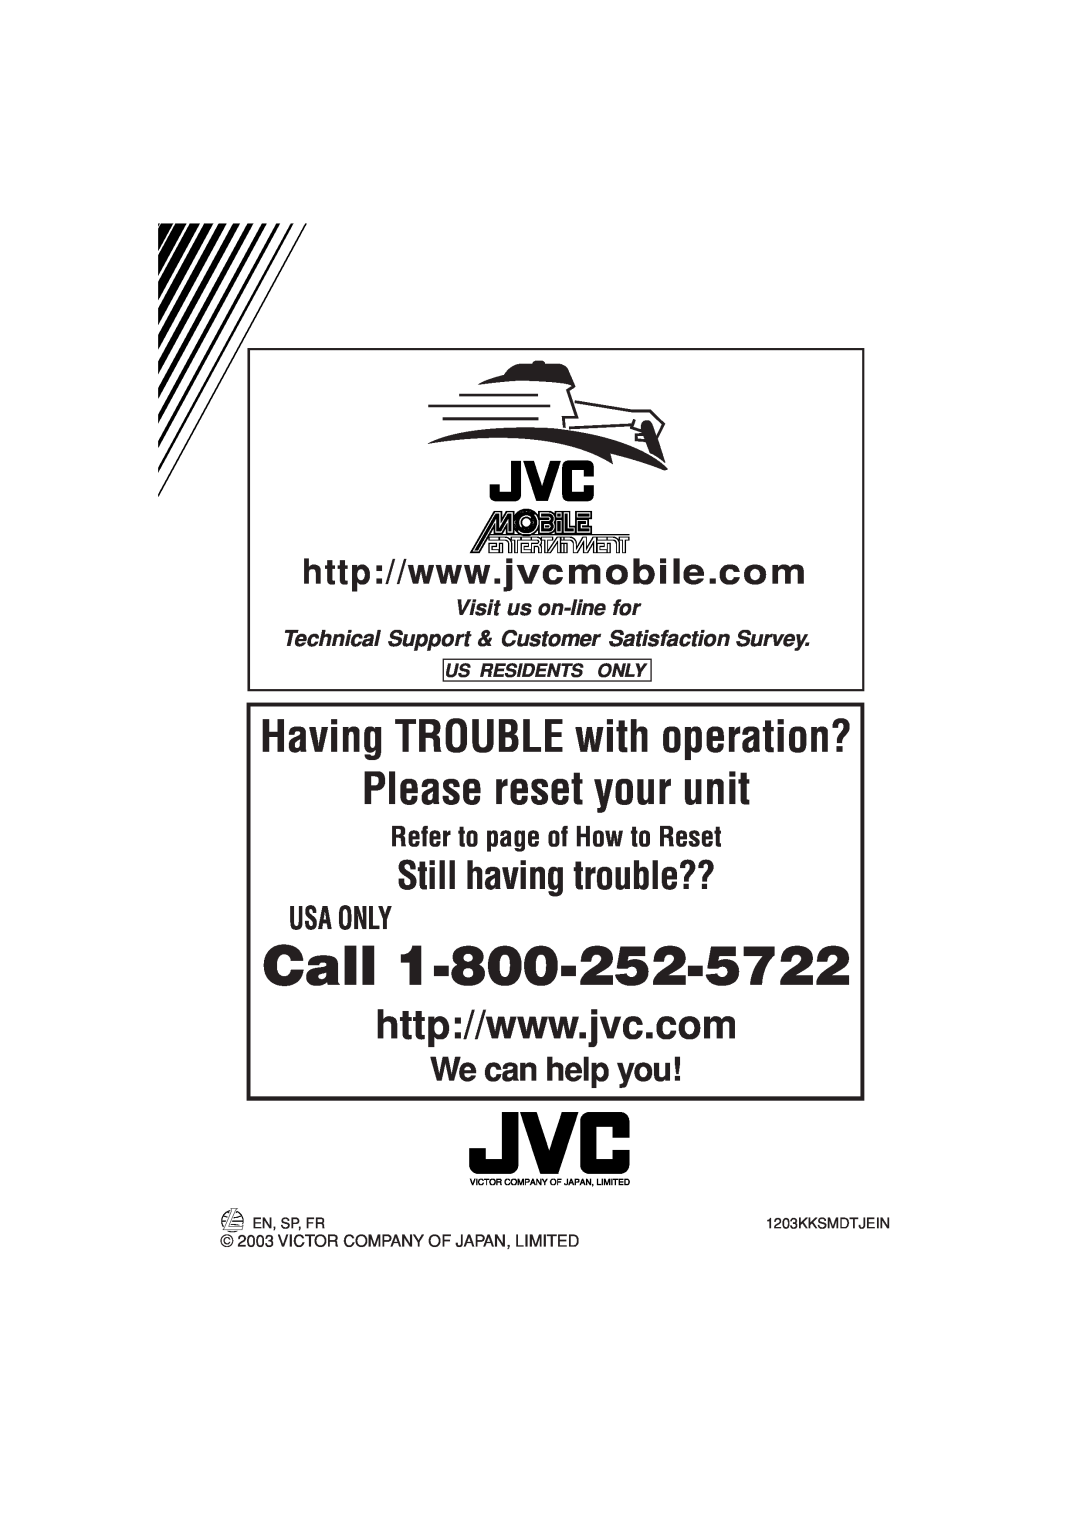 JVC KD-G700 We can help you, Us Residents Only, Call, Please reset your unit, Having TROUBLE with operation?, Usa Only 